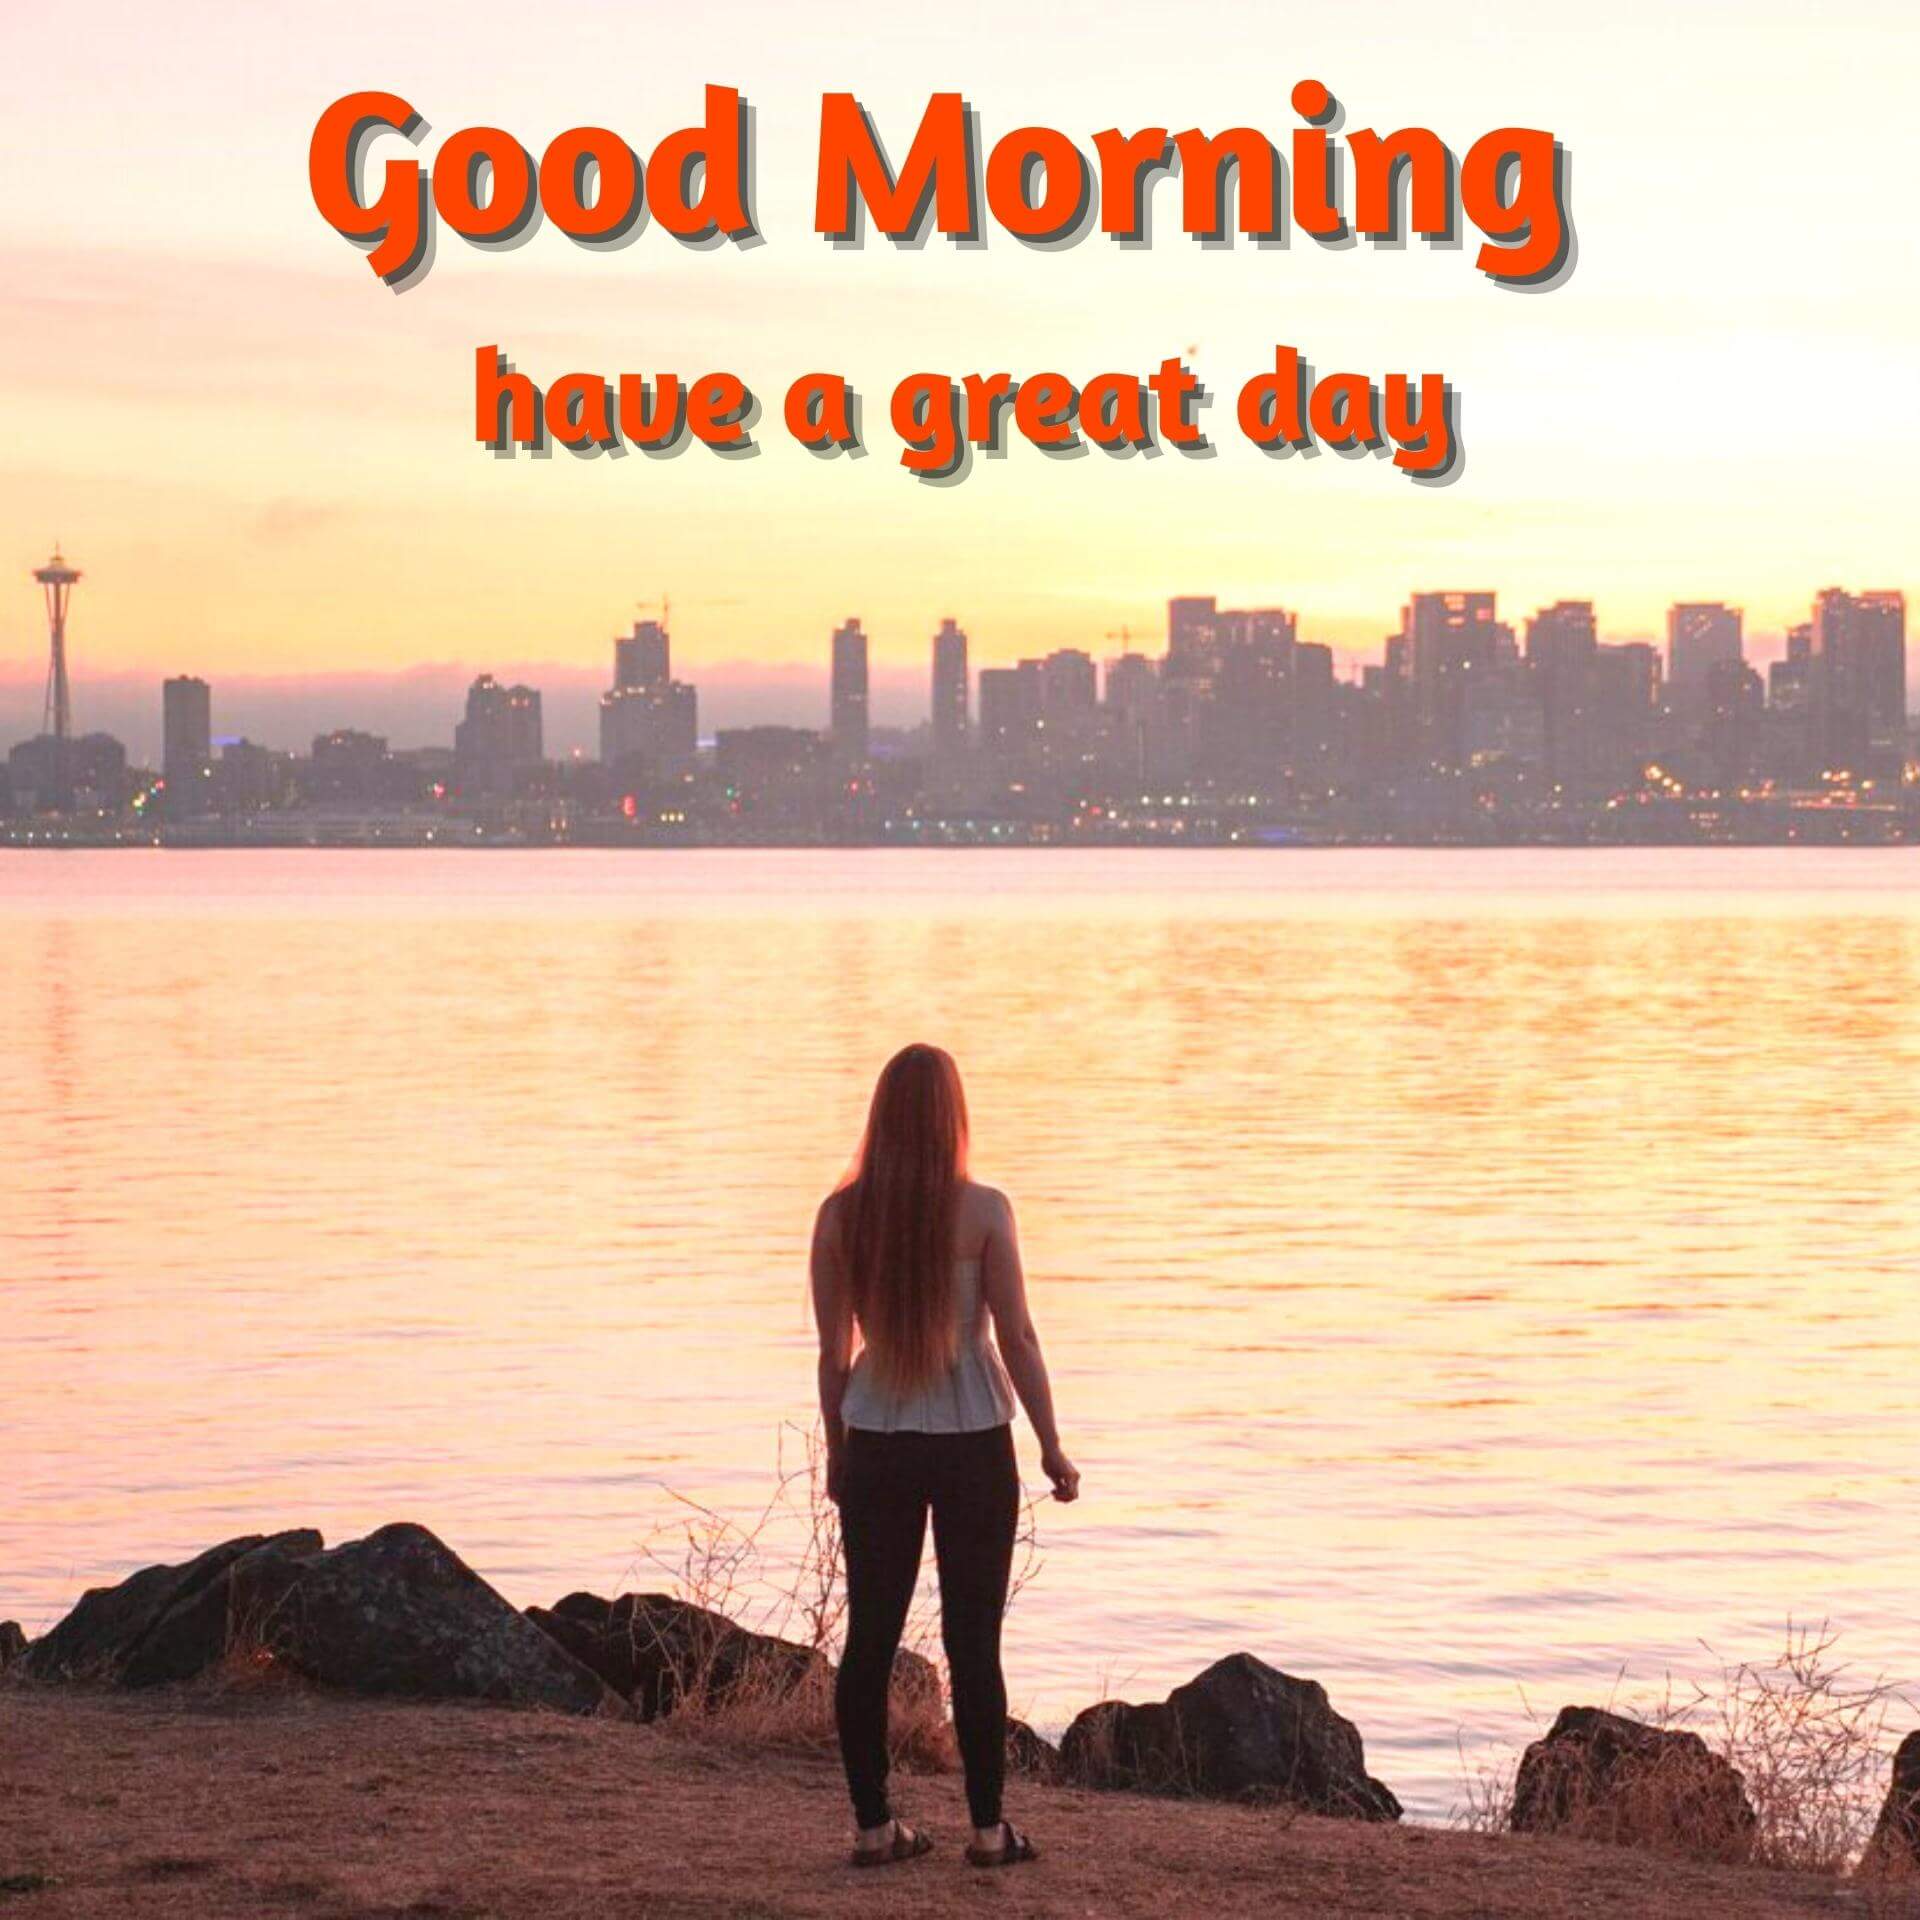 good morning message download free